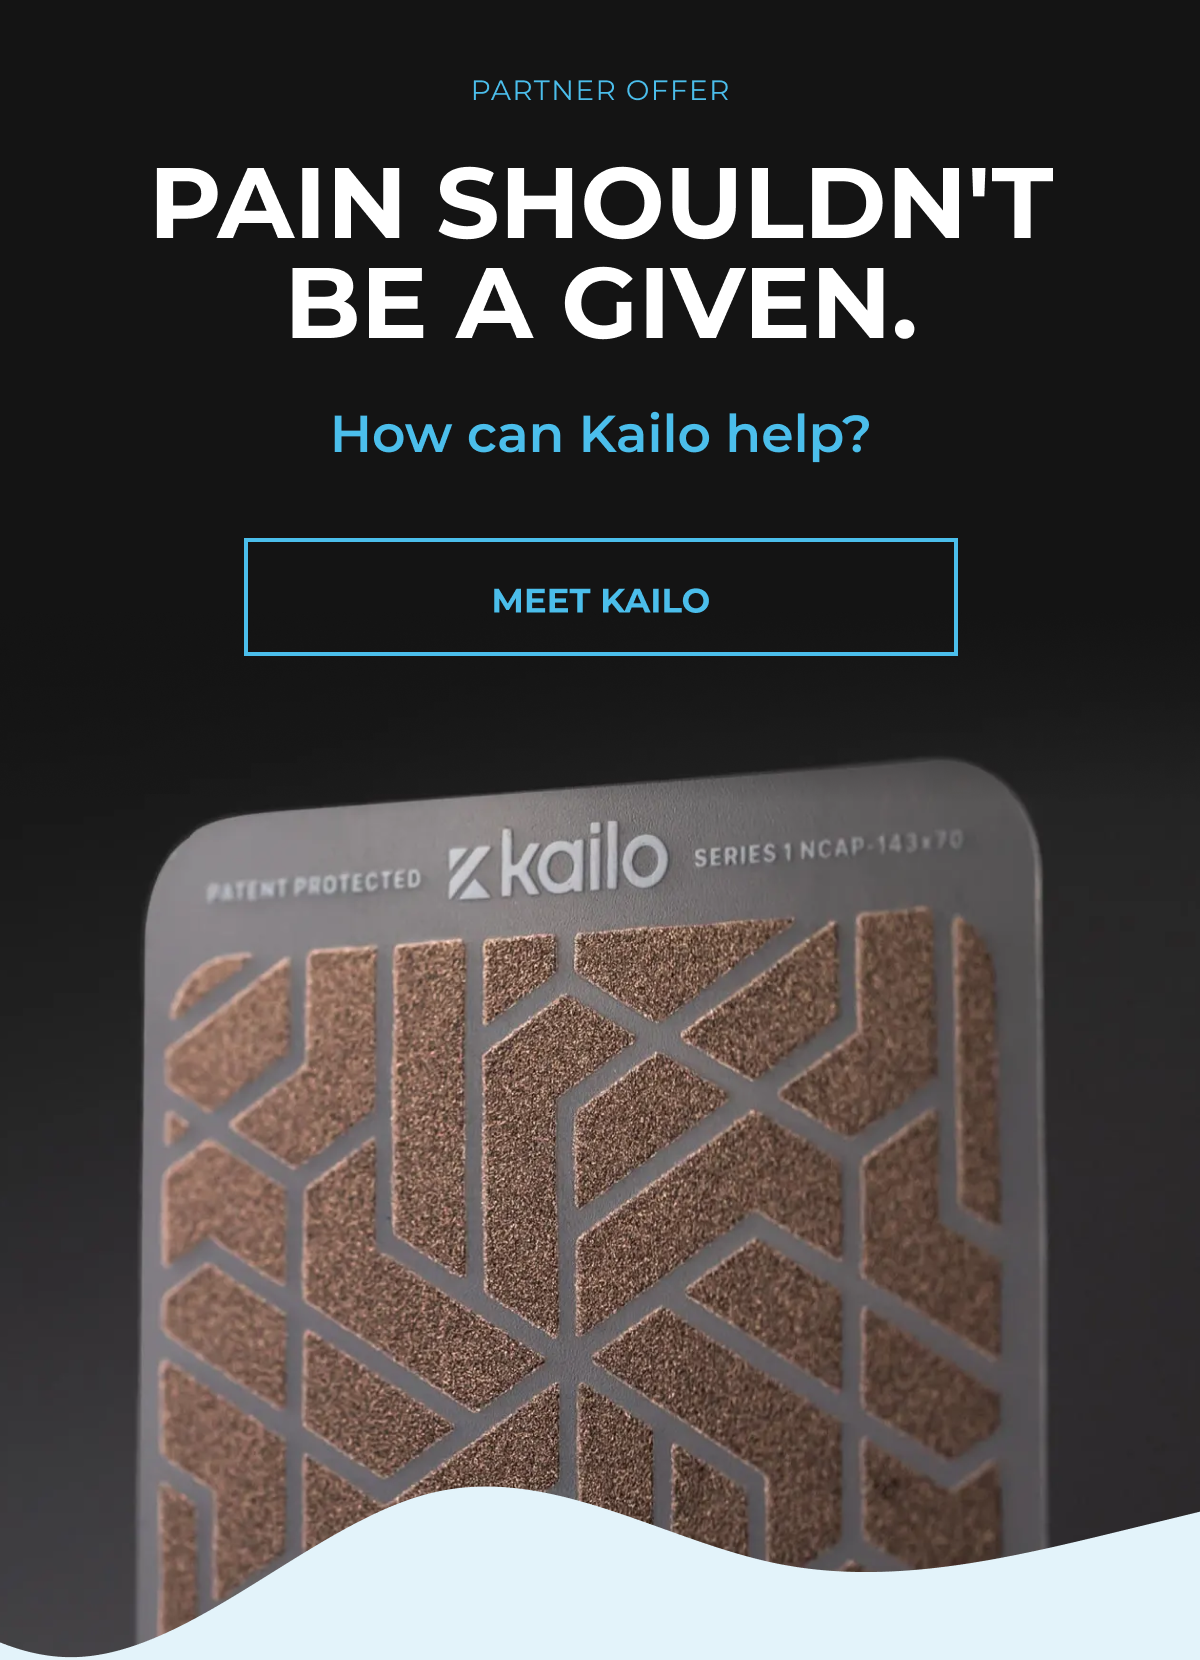 Pain shouldn't be a given. How can Kailo help?